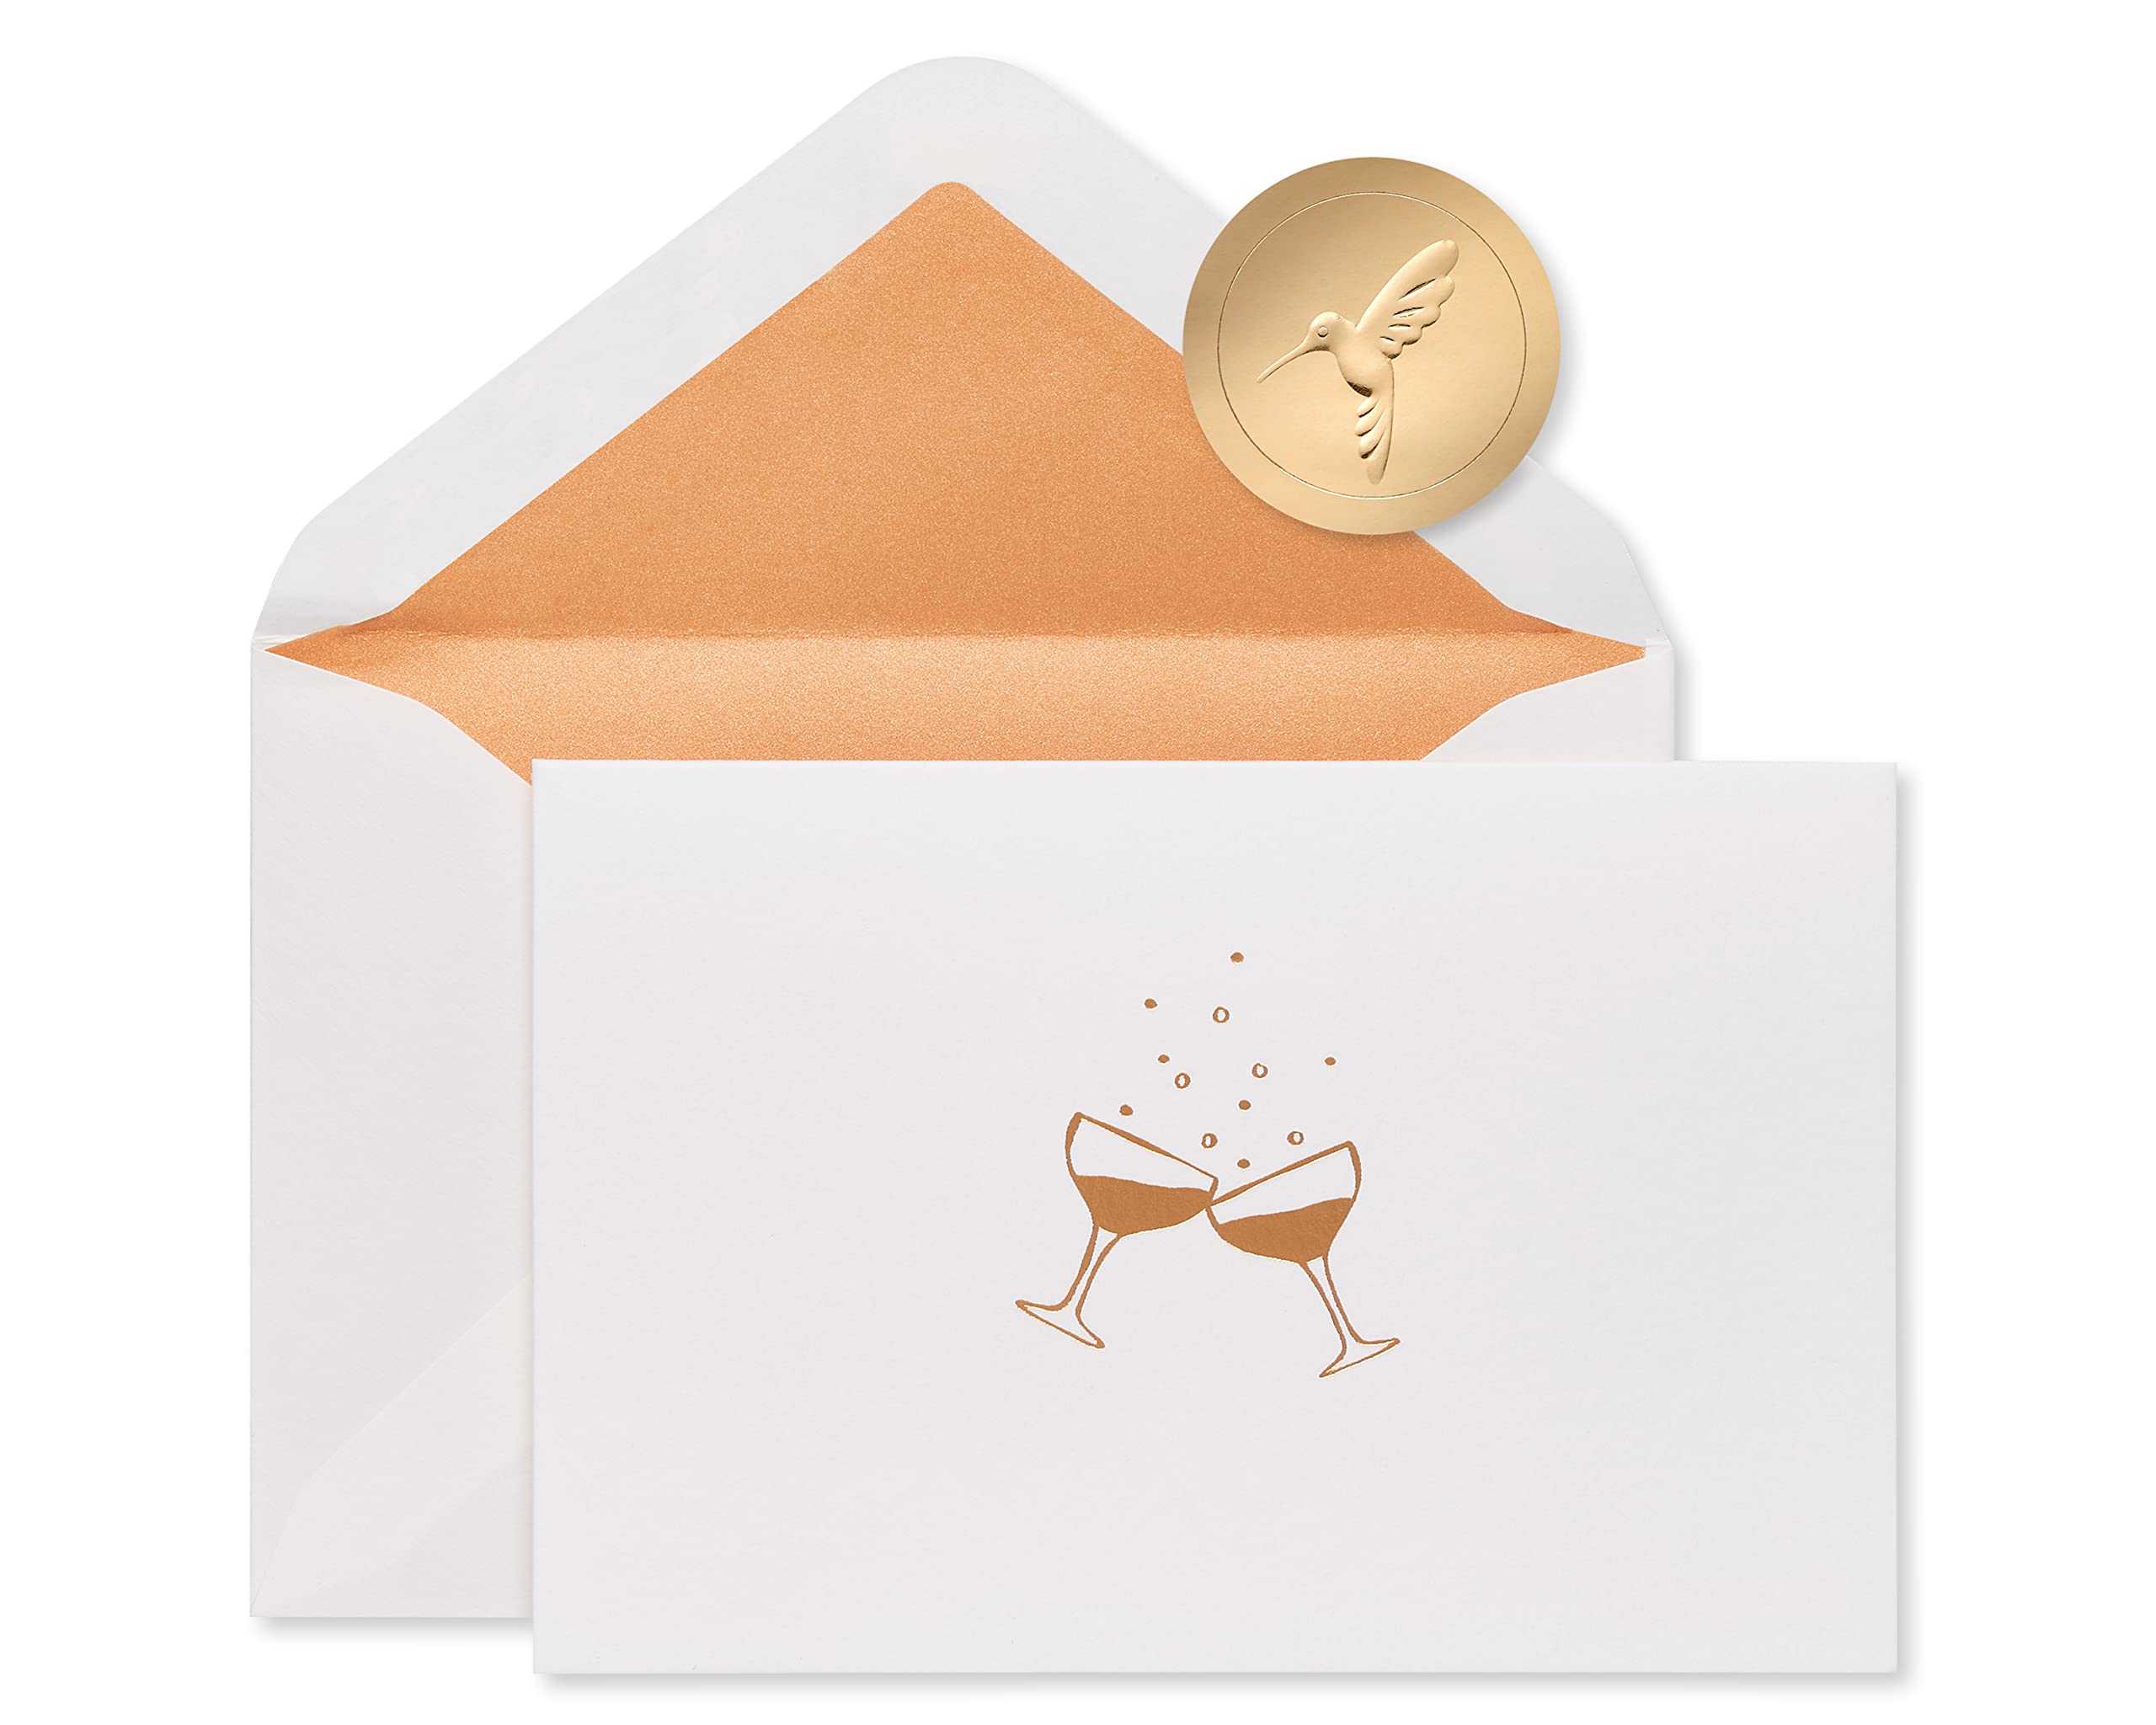 Papyrus Blank Cards with Envelopes, Champagne Glasses (16-Count)